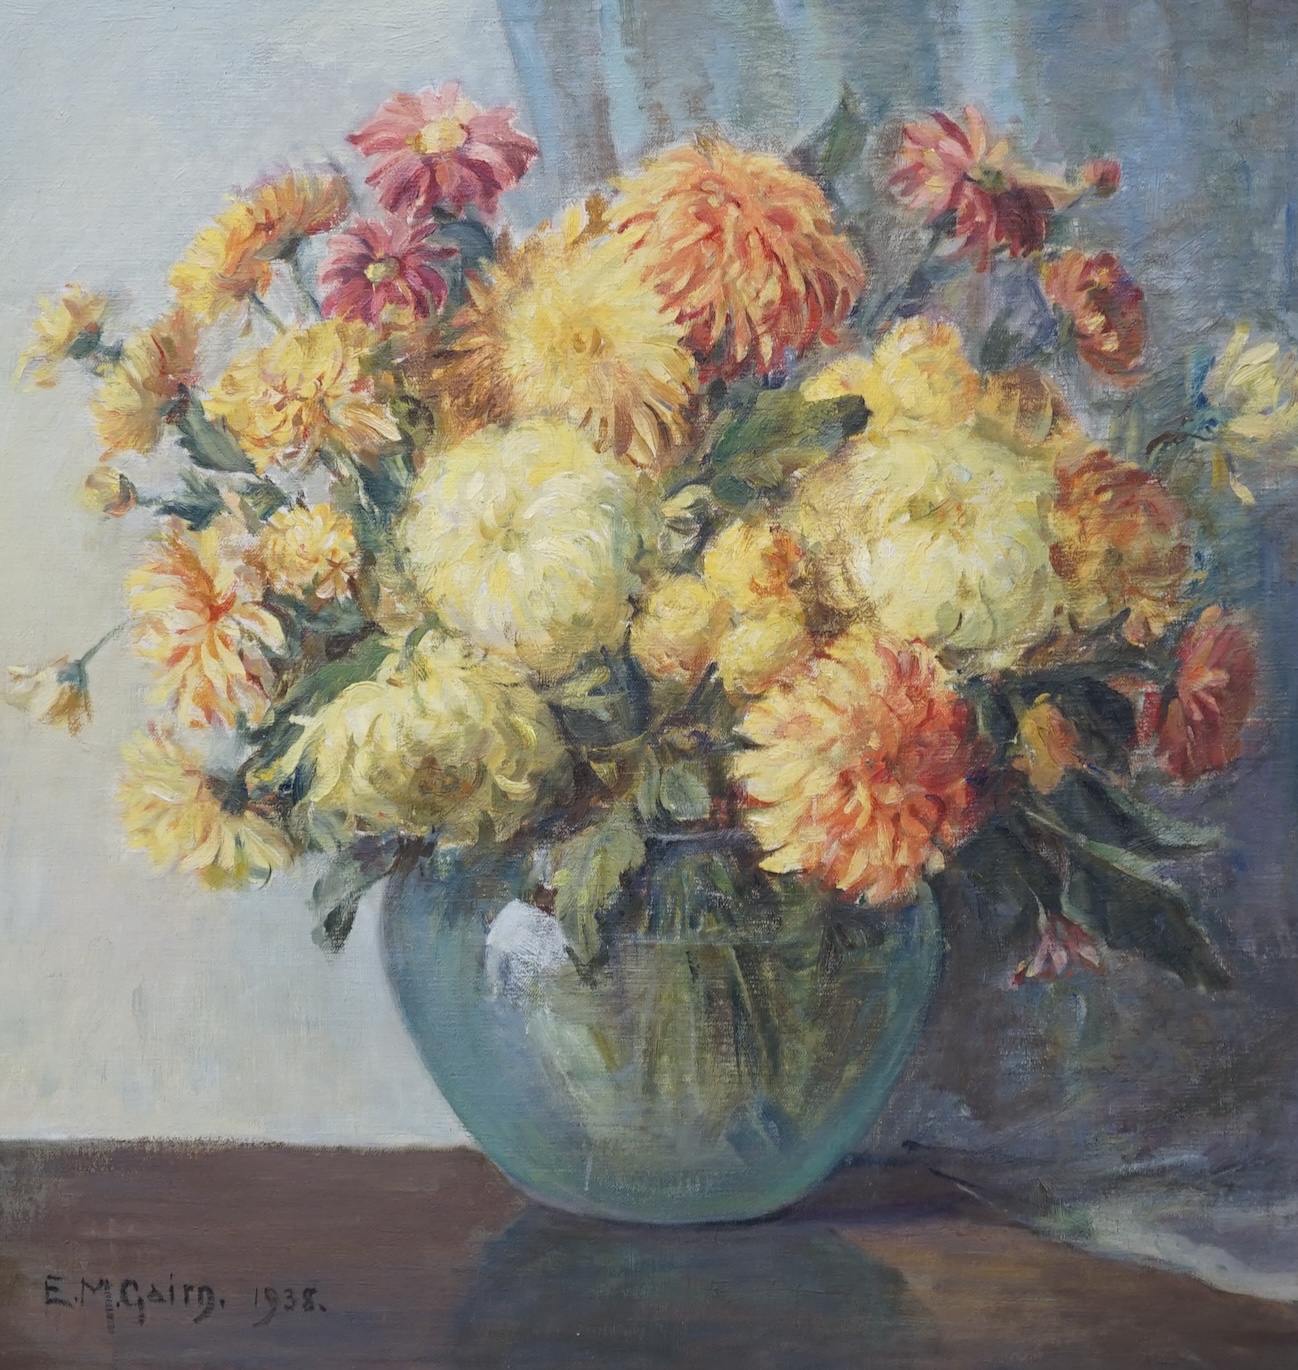 E.M. Gairn, oil on board, Still life of flowers in a vase, signed and dated 1938, 61 x 57cm. Condition - good, some very minor scuffs